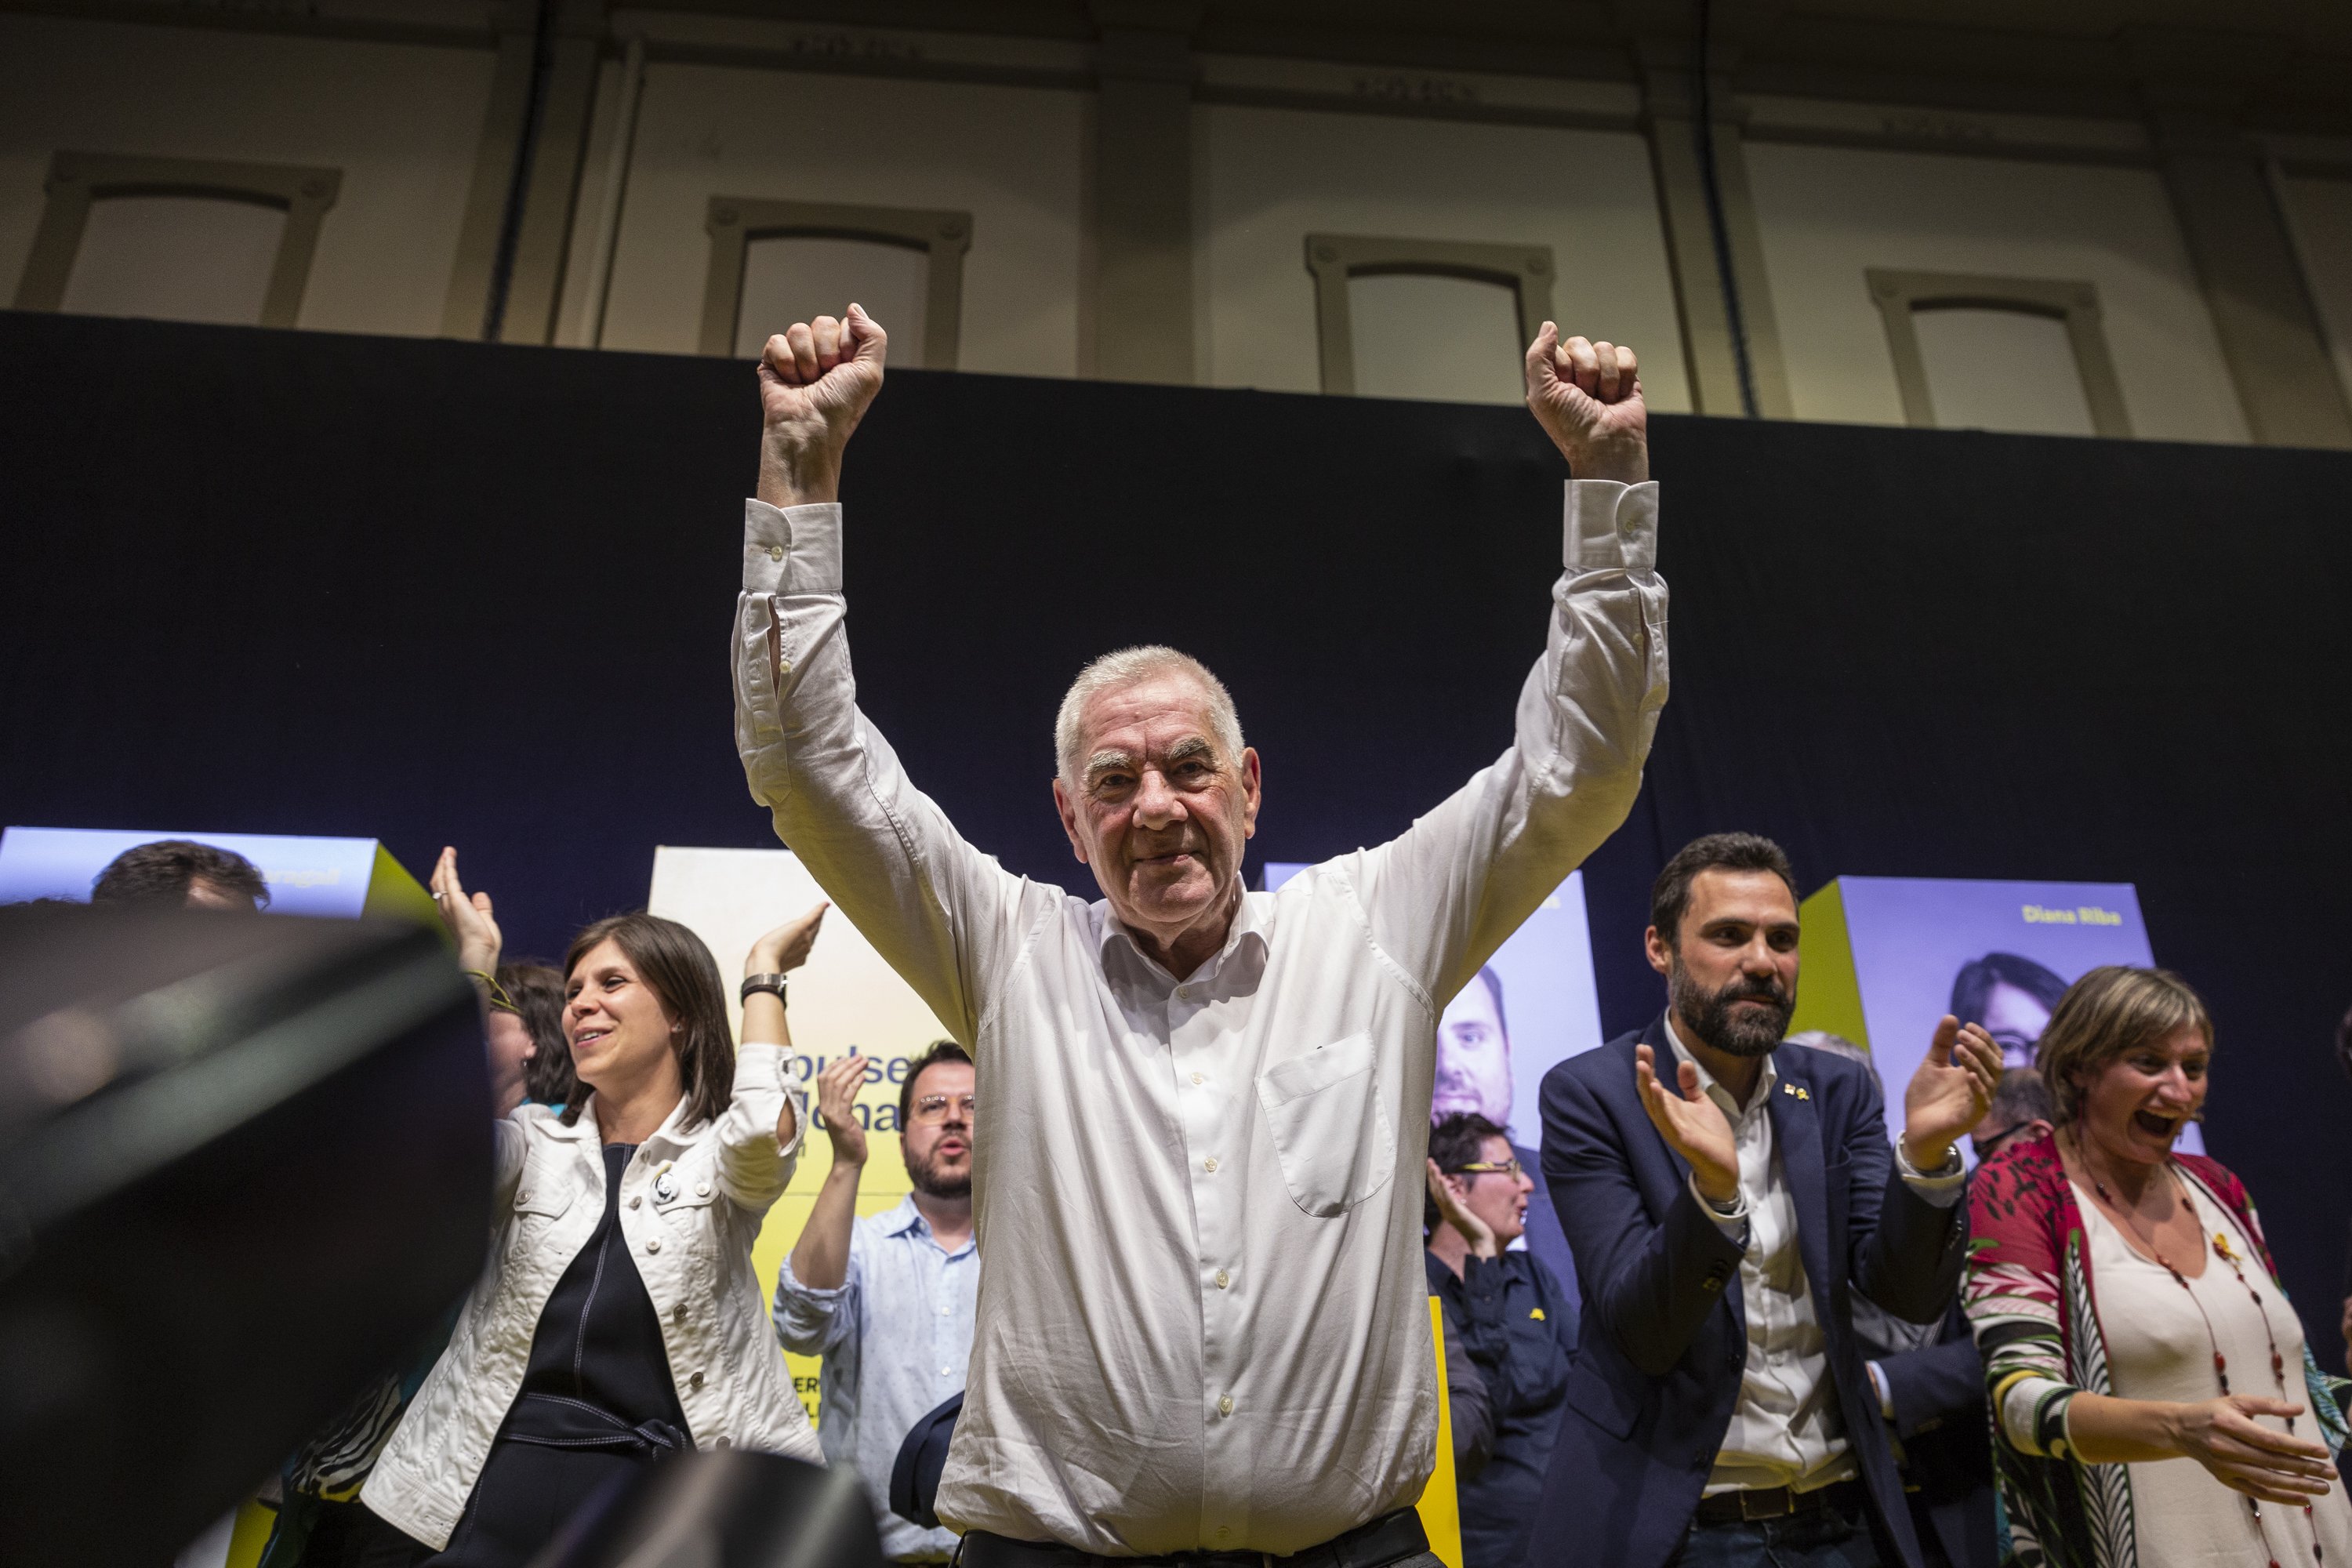 Ernest Maragall noses ahead of Ada Colau to win tight Barcelona mayoral race